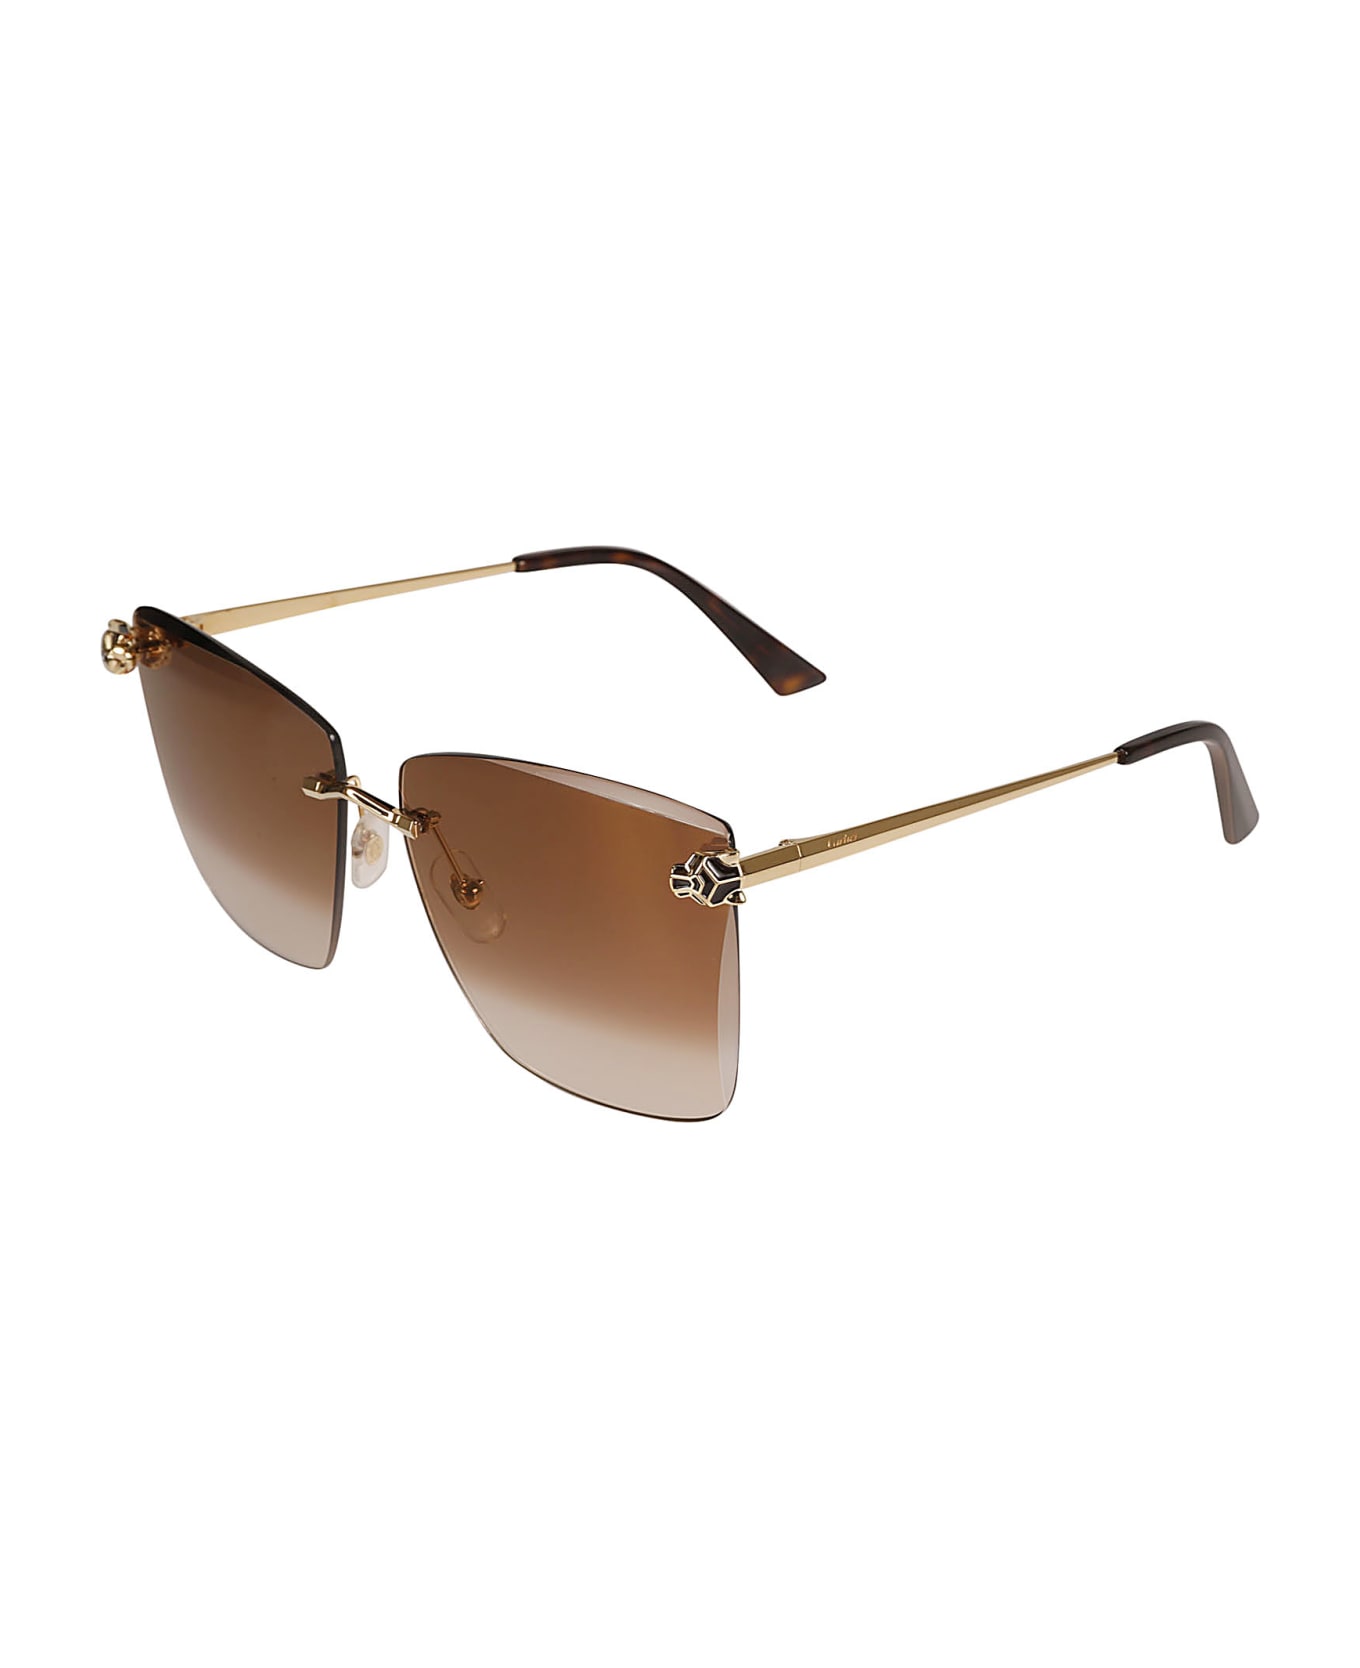 Cartier Eyewear Butterfly Square Sunglasses - Gold/Brown